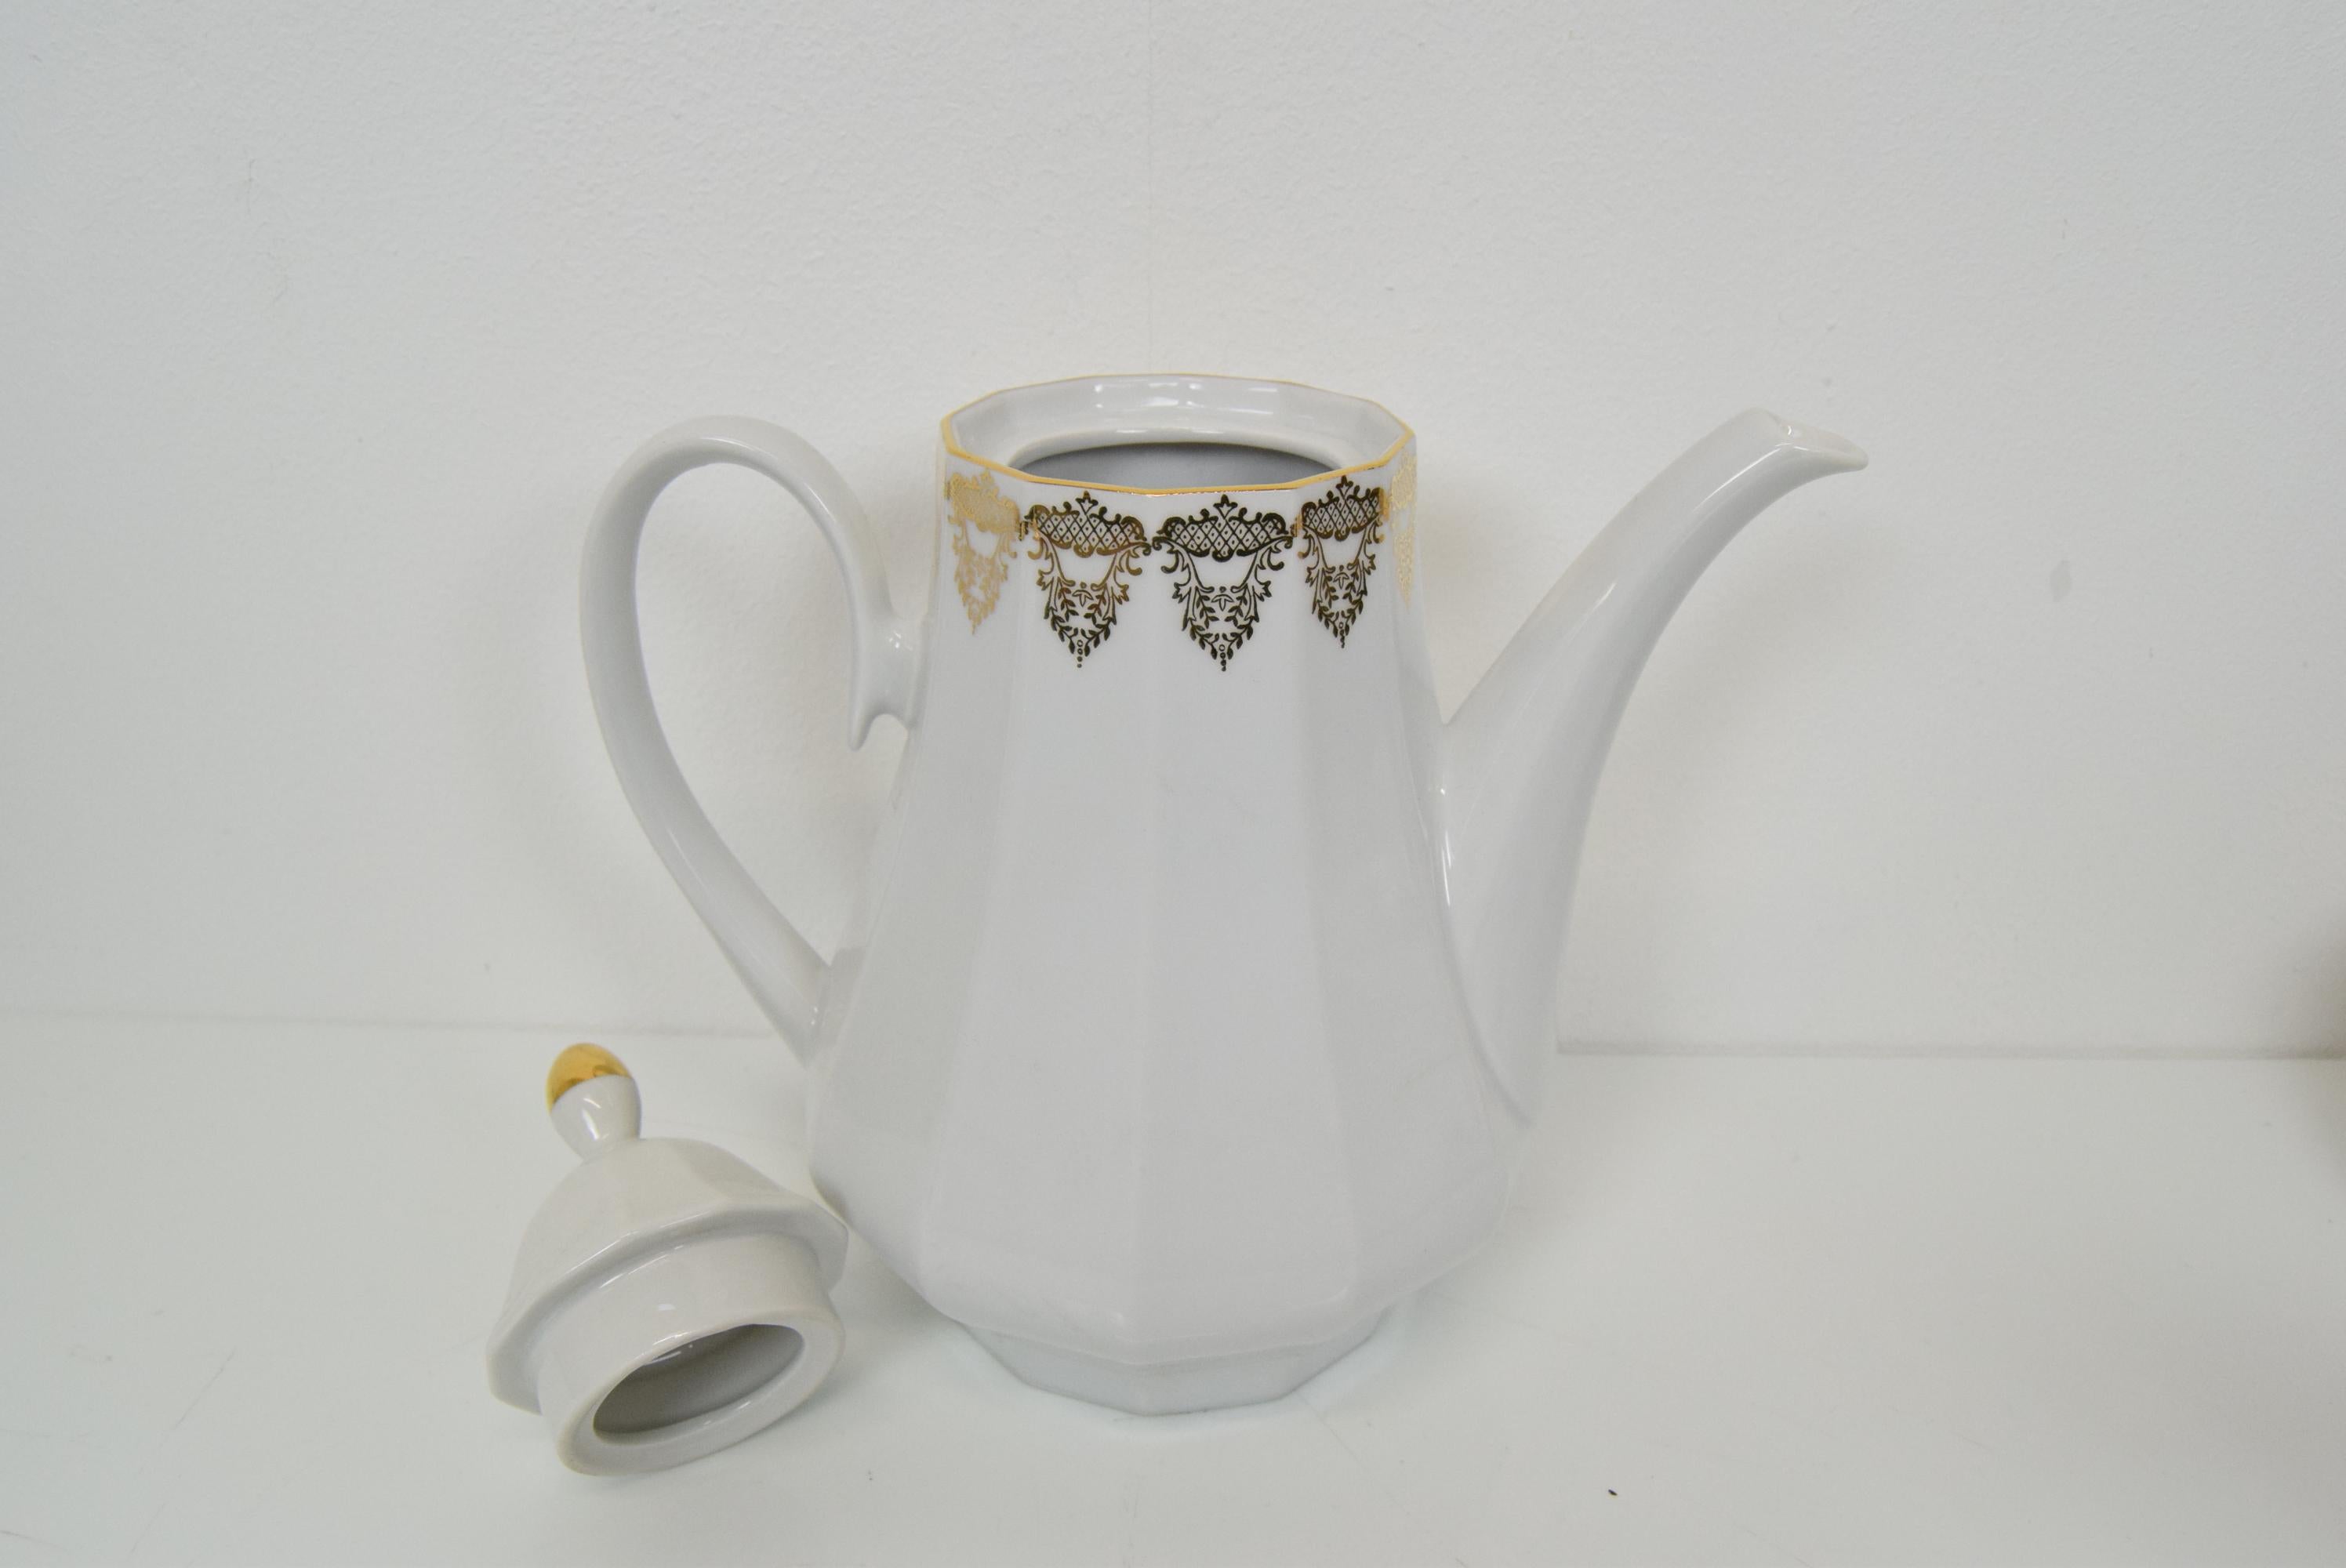 Set Porcelain for Tea or Coffee, Carlsbad Porcealin by Company Epiag D.F In Good Condition For Sale In Praha, CZ